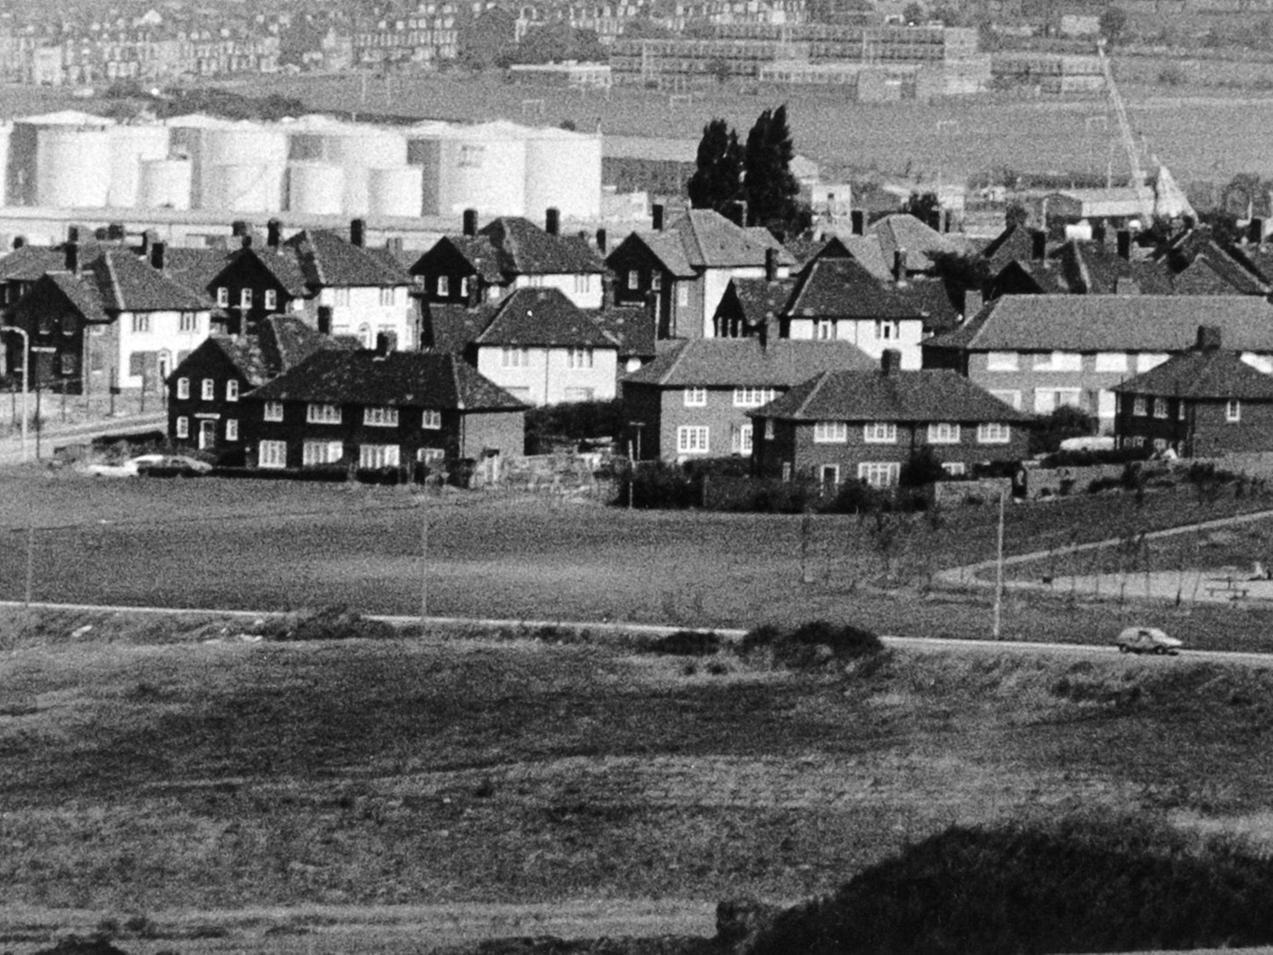 Recognise this housing estate? It's a view of Belle Isle in south Leeds.